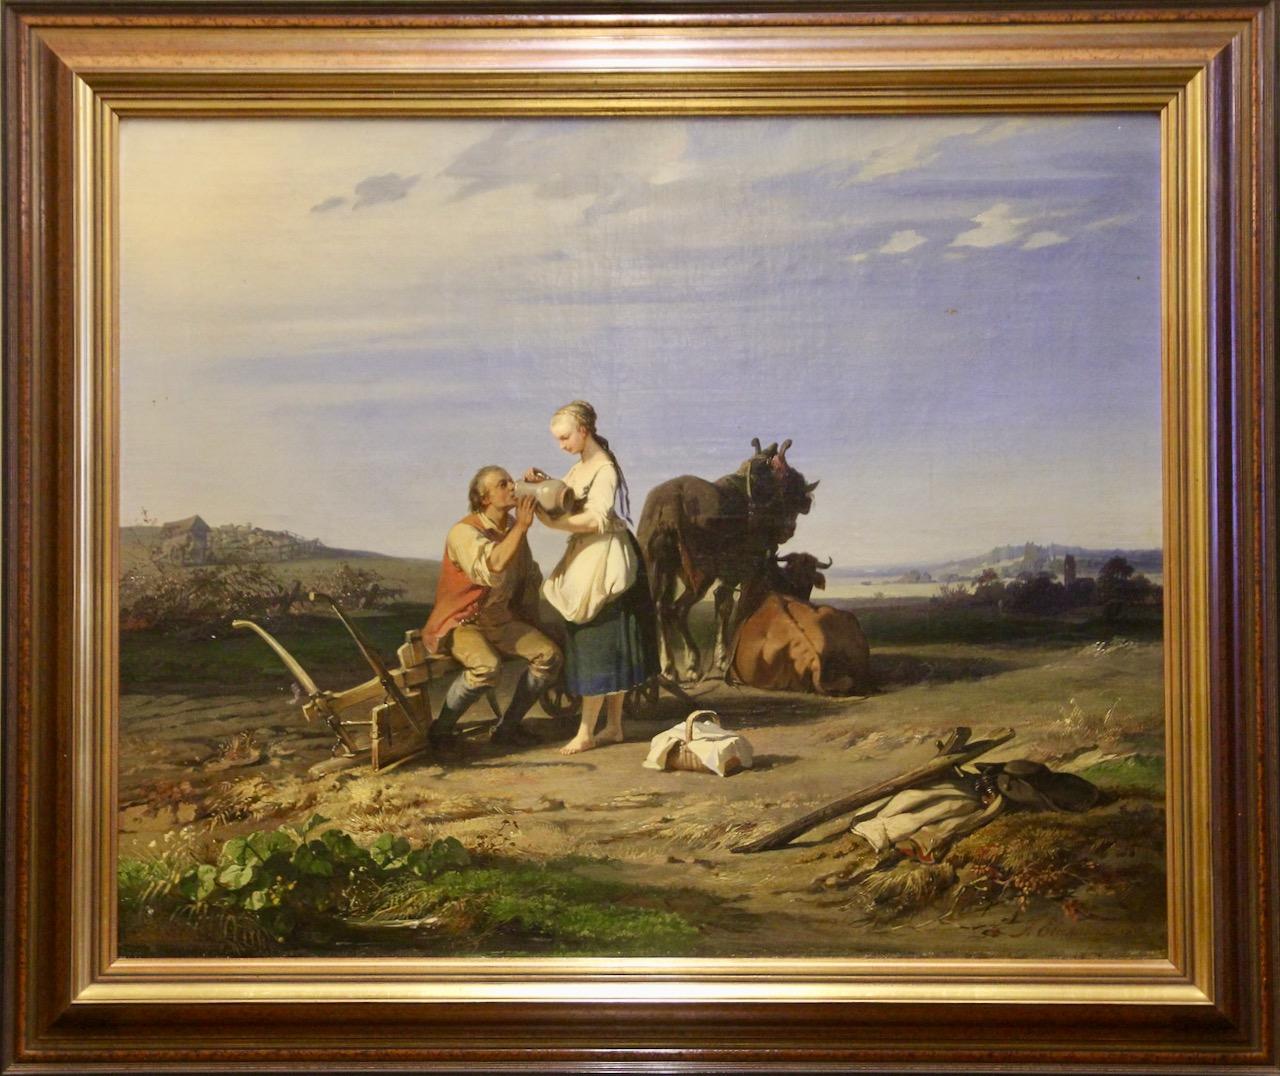 Johann Jakob Eberhardt, 1850, museum-quality painting, oil on canvas, a break from harvesting.

High quality decorative oil painting. Signed and dated lower right, as well as on the back. 